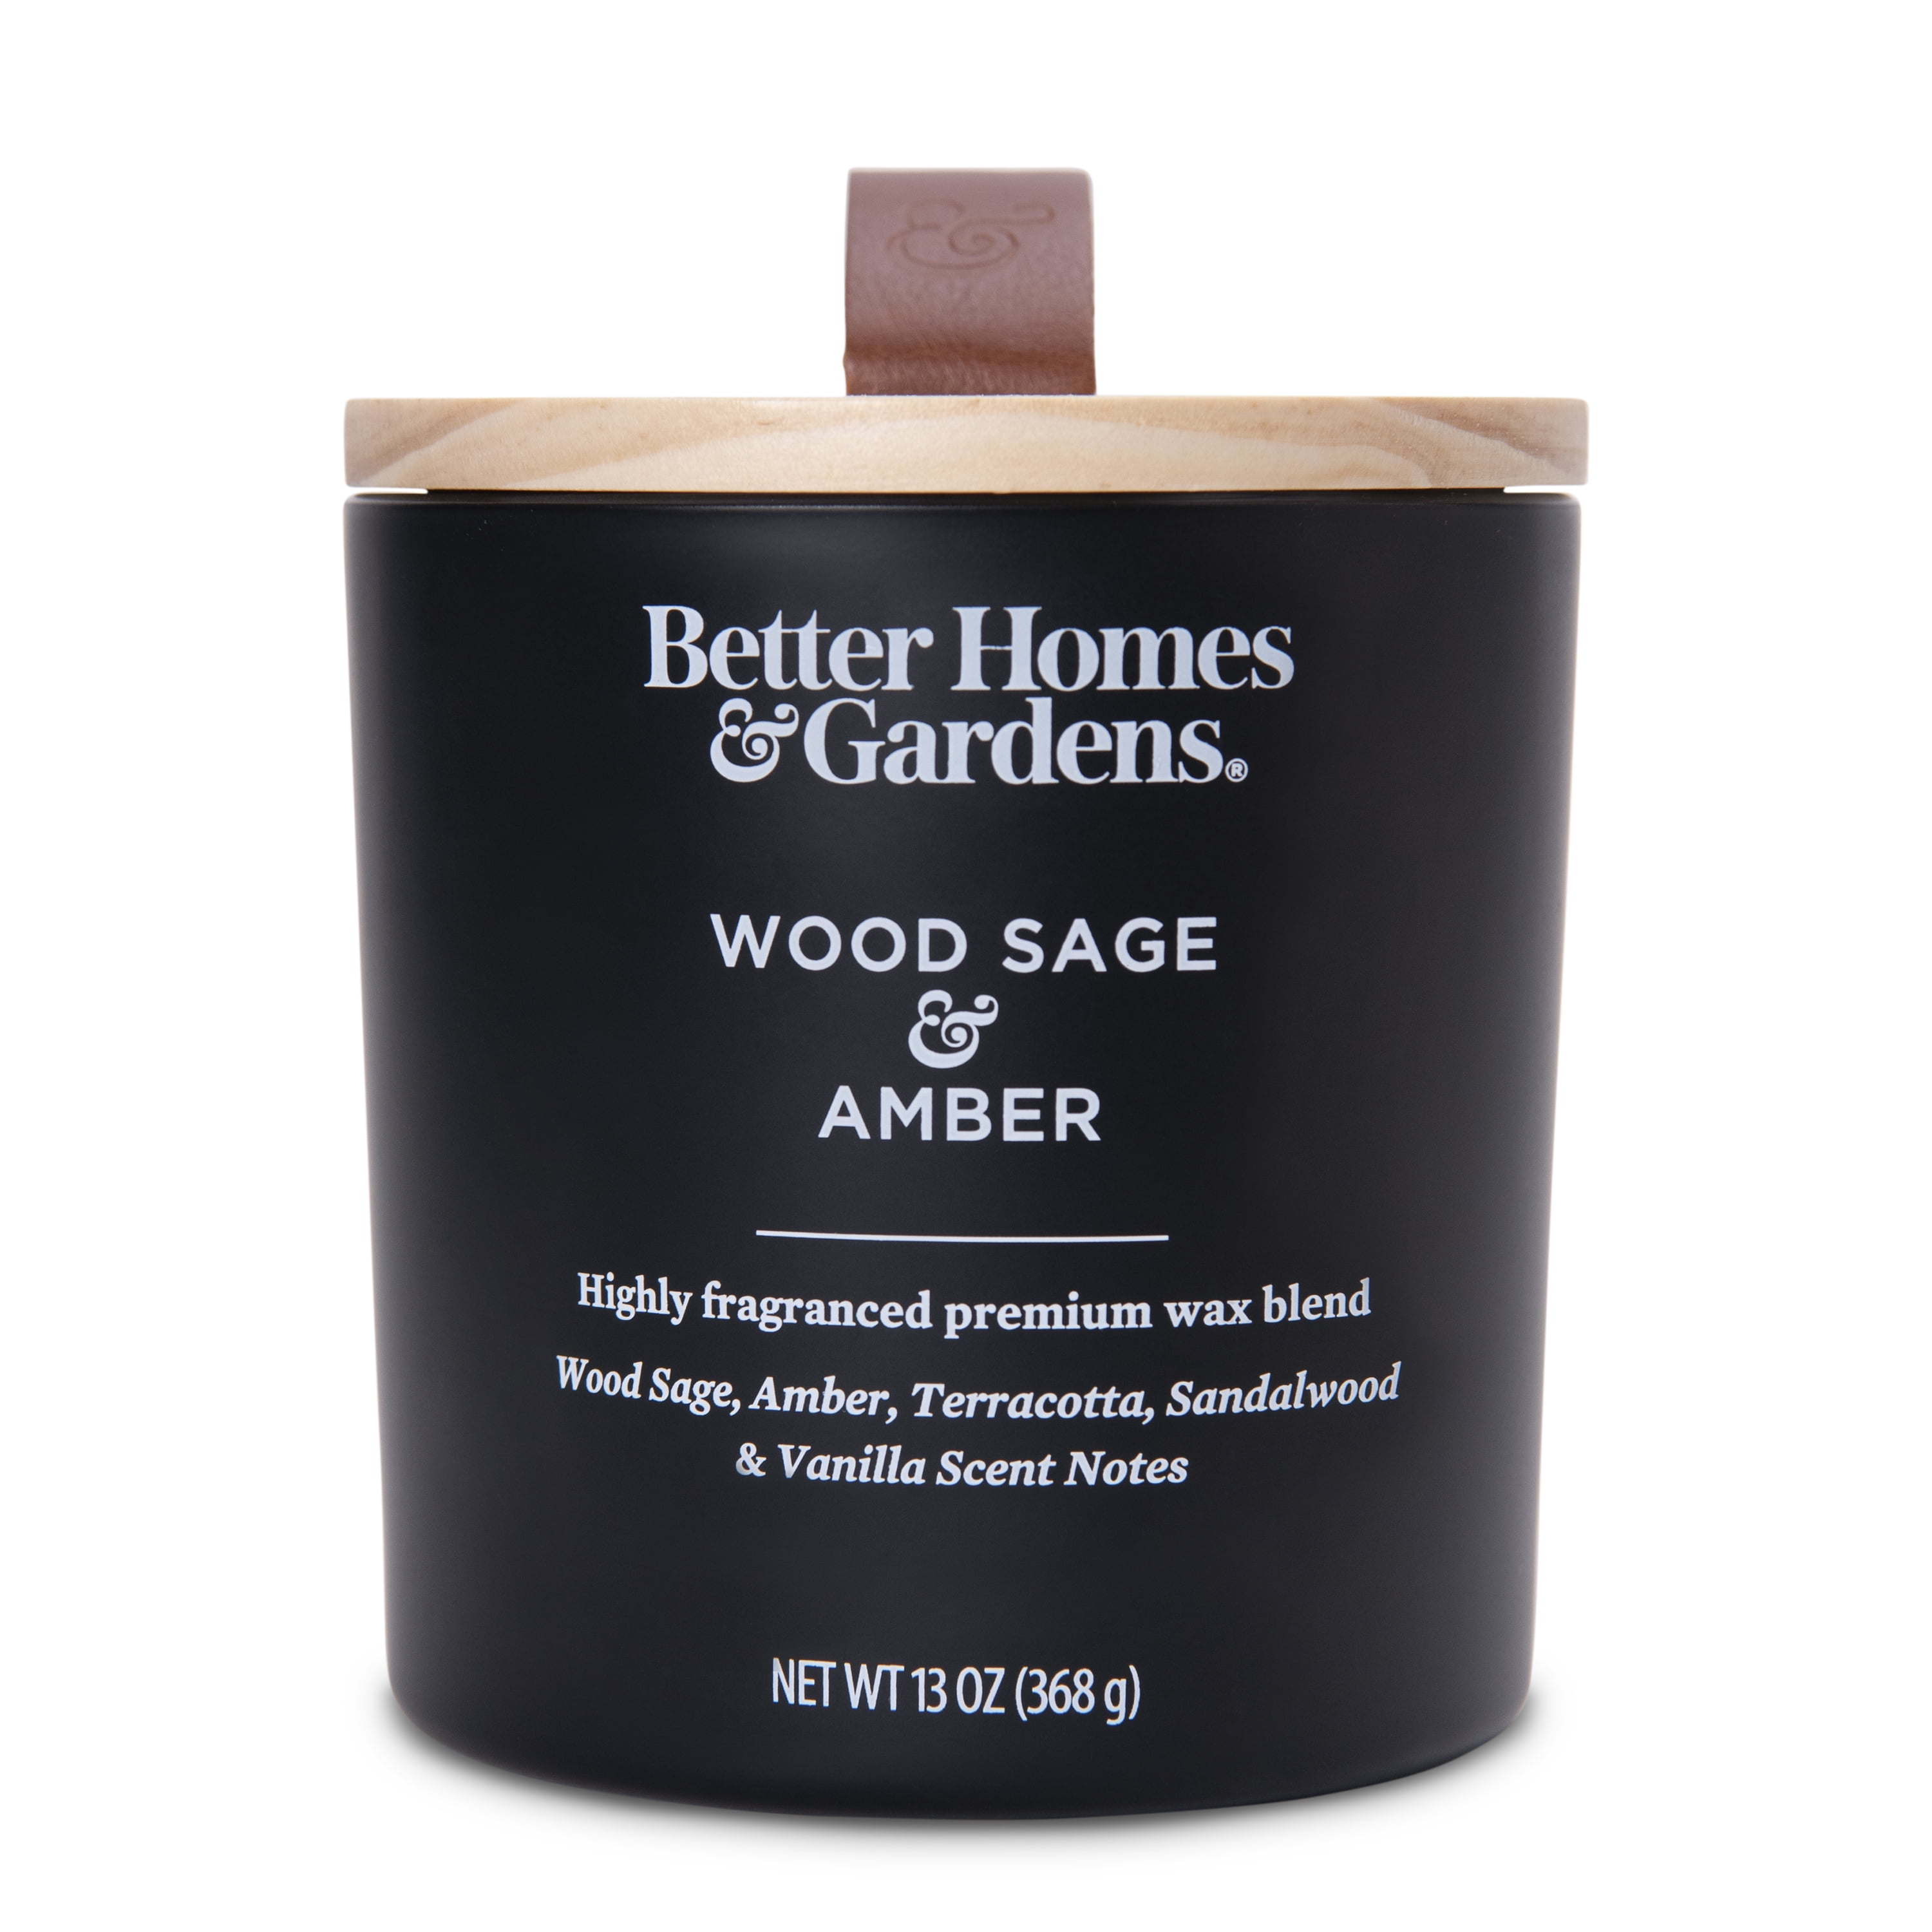 Better Homes & Gardens 13oz Wood Sage & Amber Scented Wooden Jar Wick candle